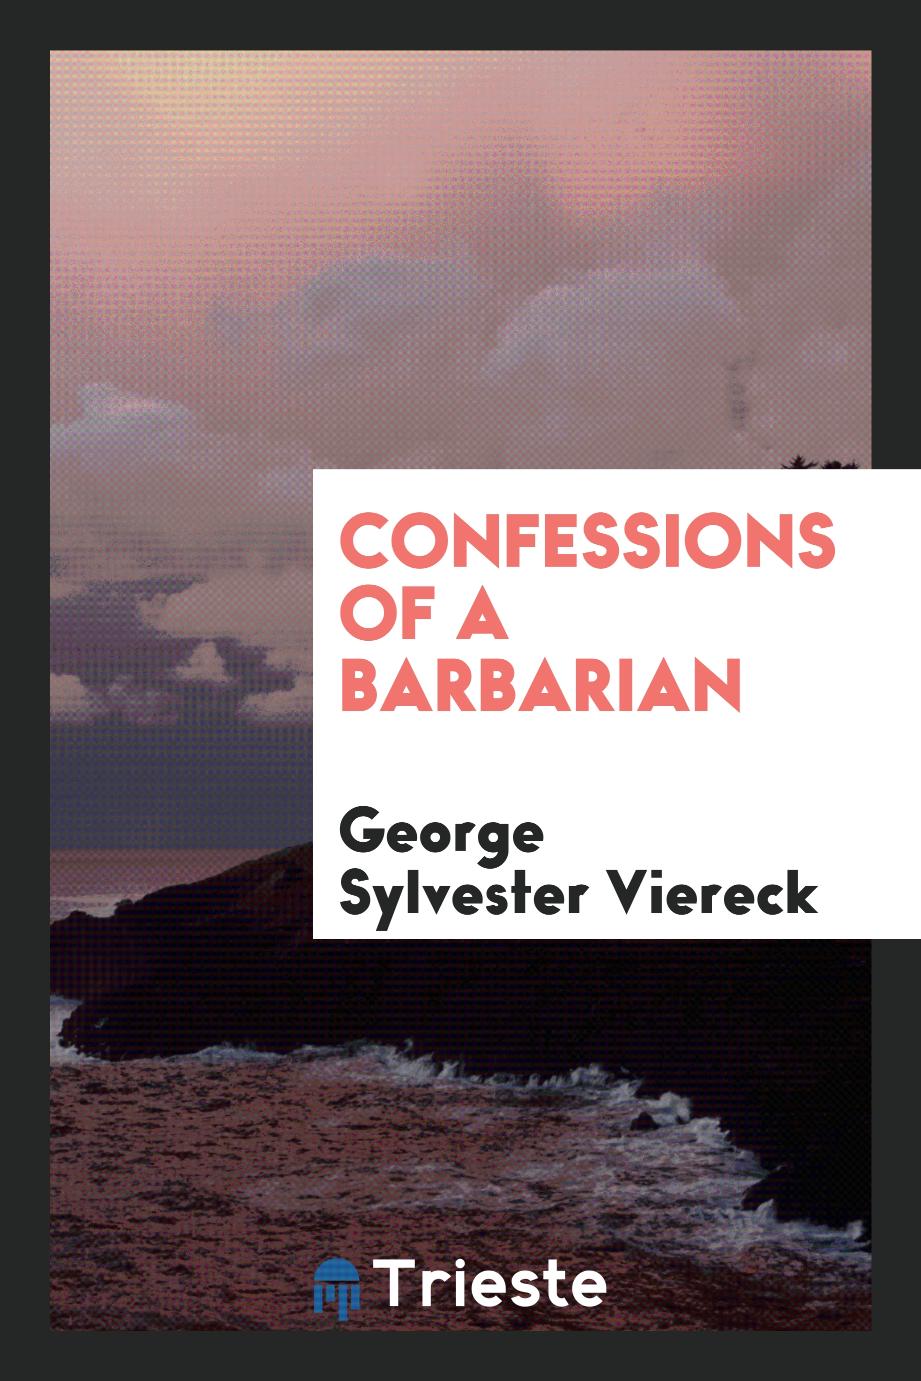 Confessions of a barbarian